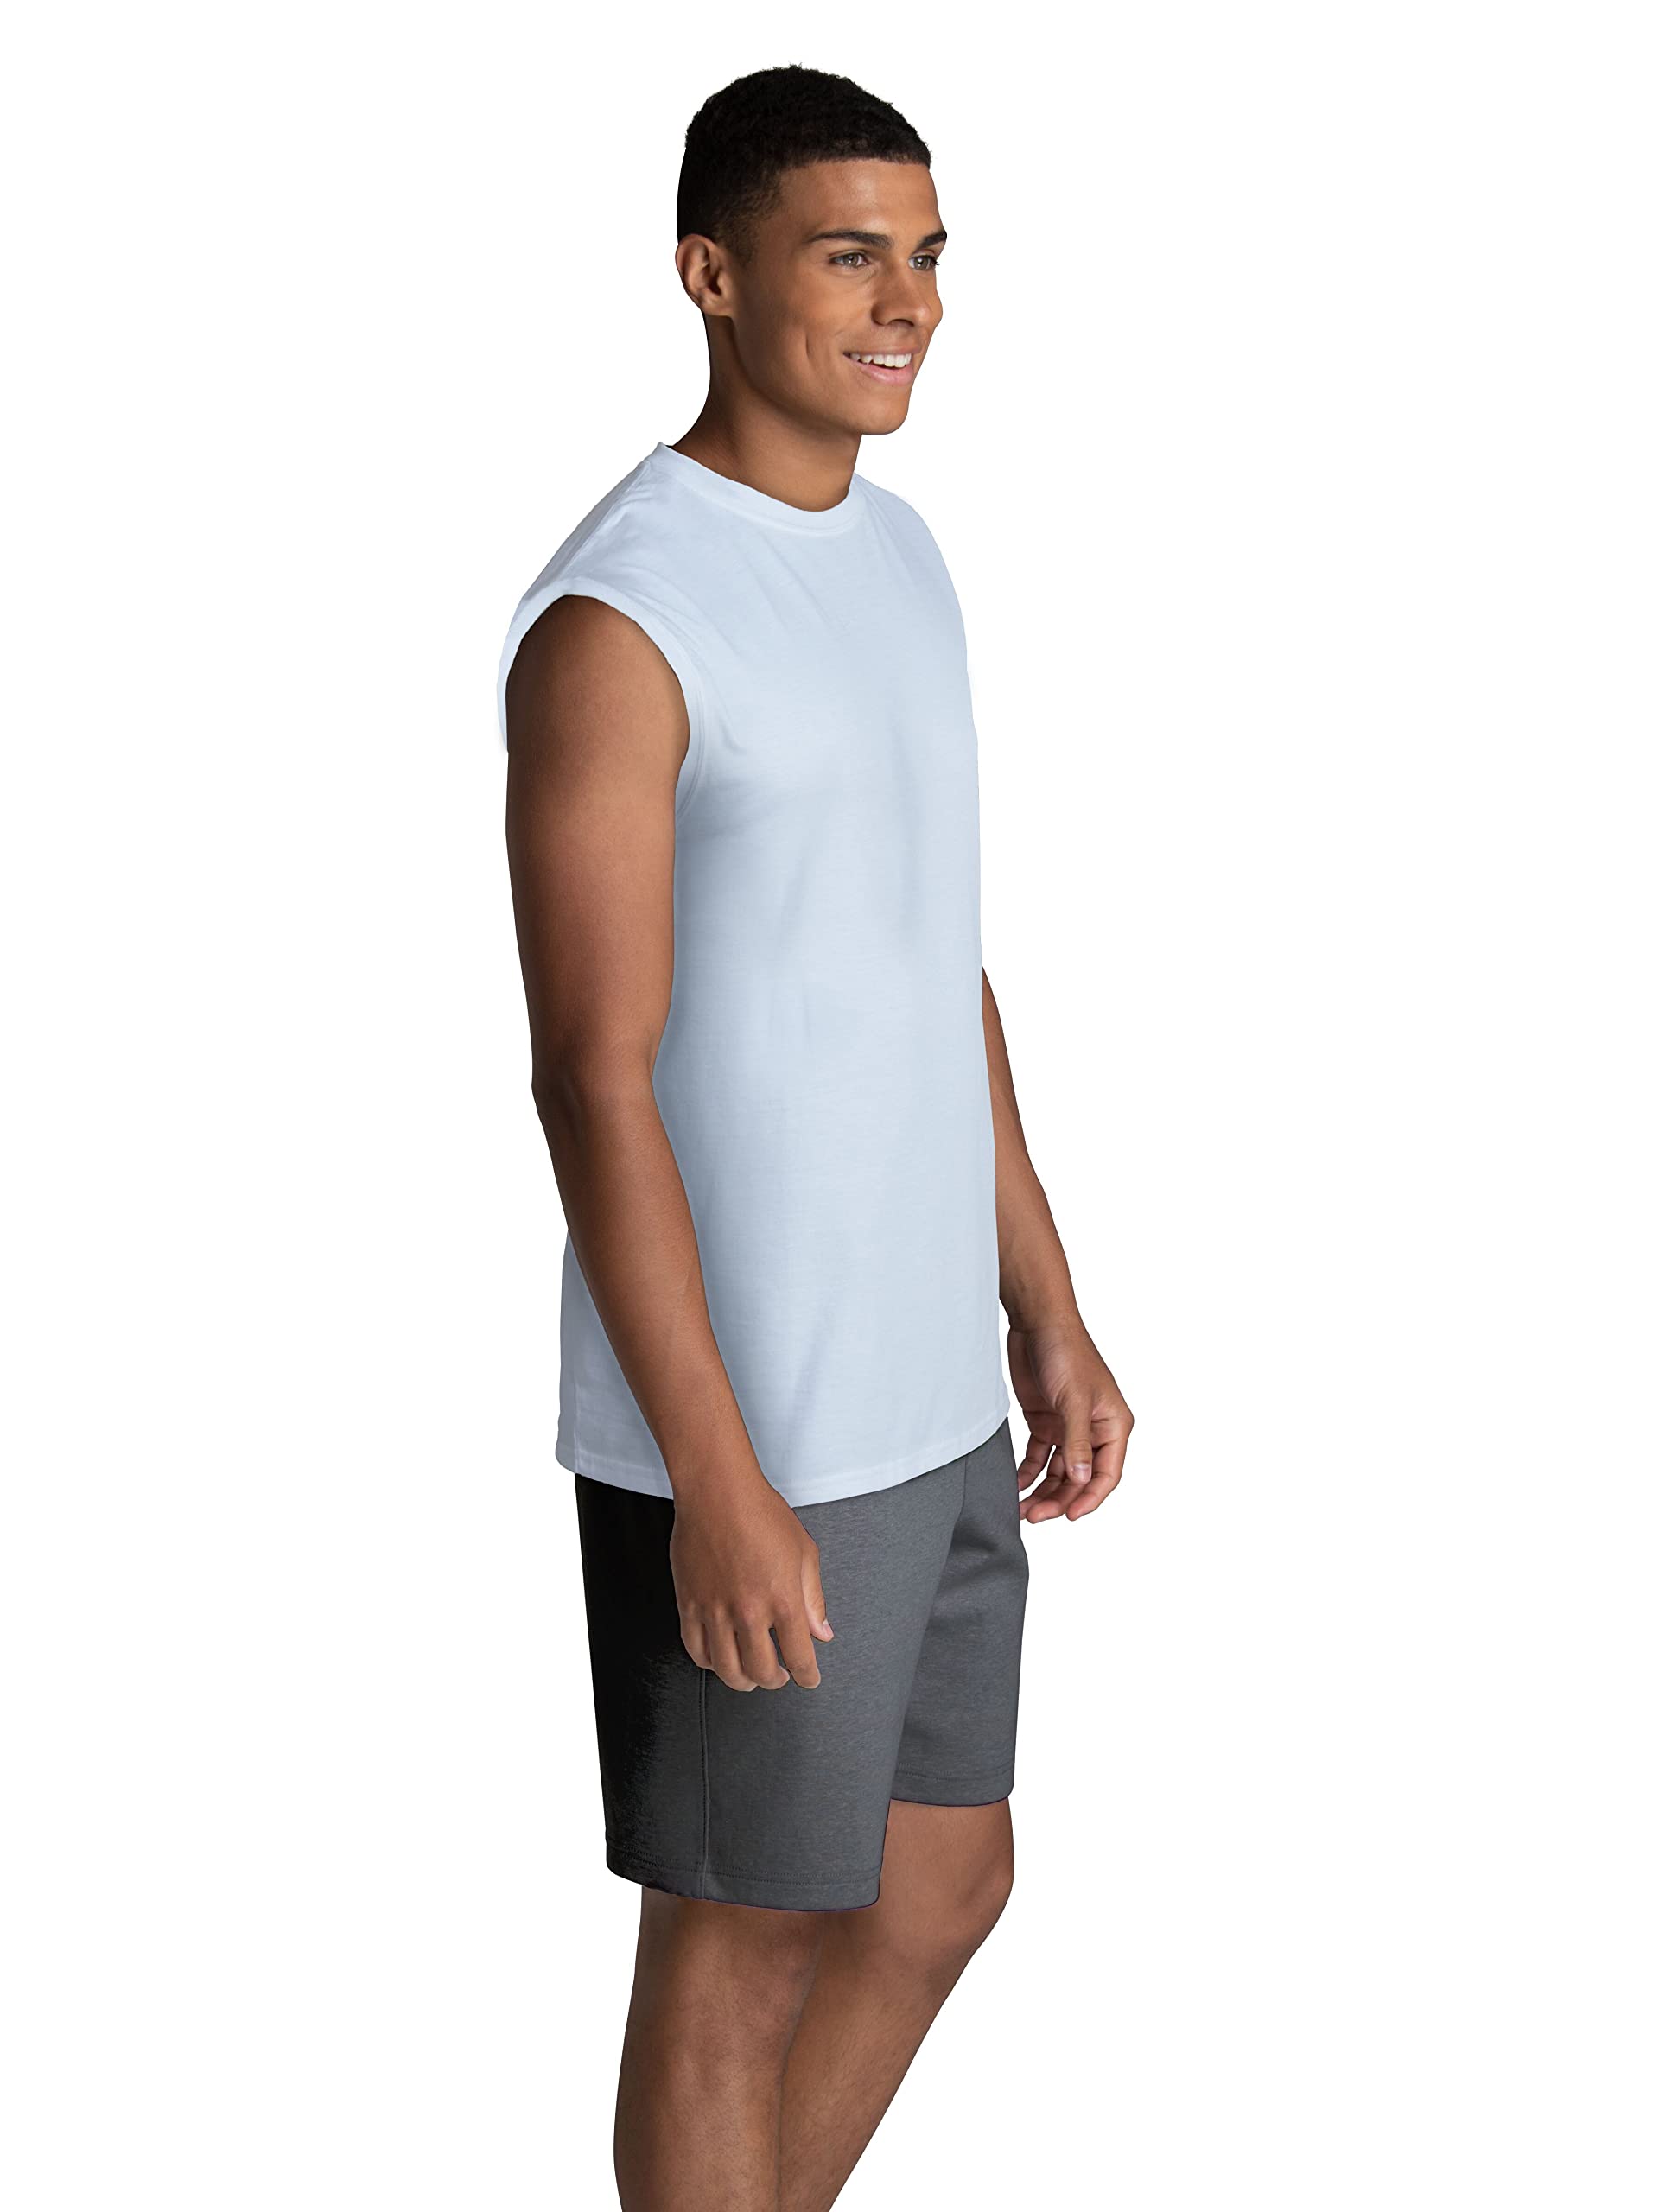 Fruit of the Loom Men's Eversoft Cotton Sleeveless T Shirts, Breathable & Moisture Wicking with Odor Control, Sizes S-4X